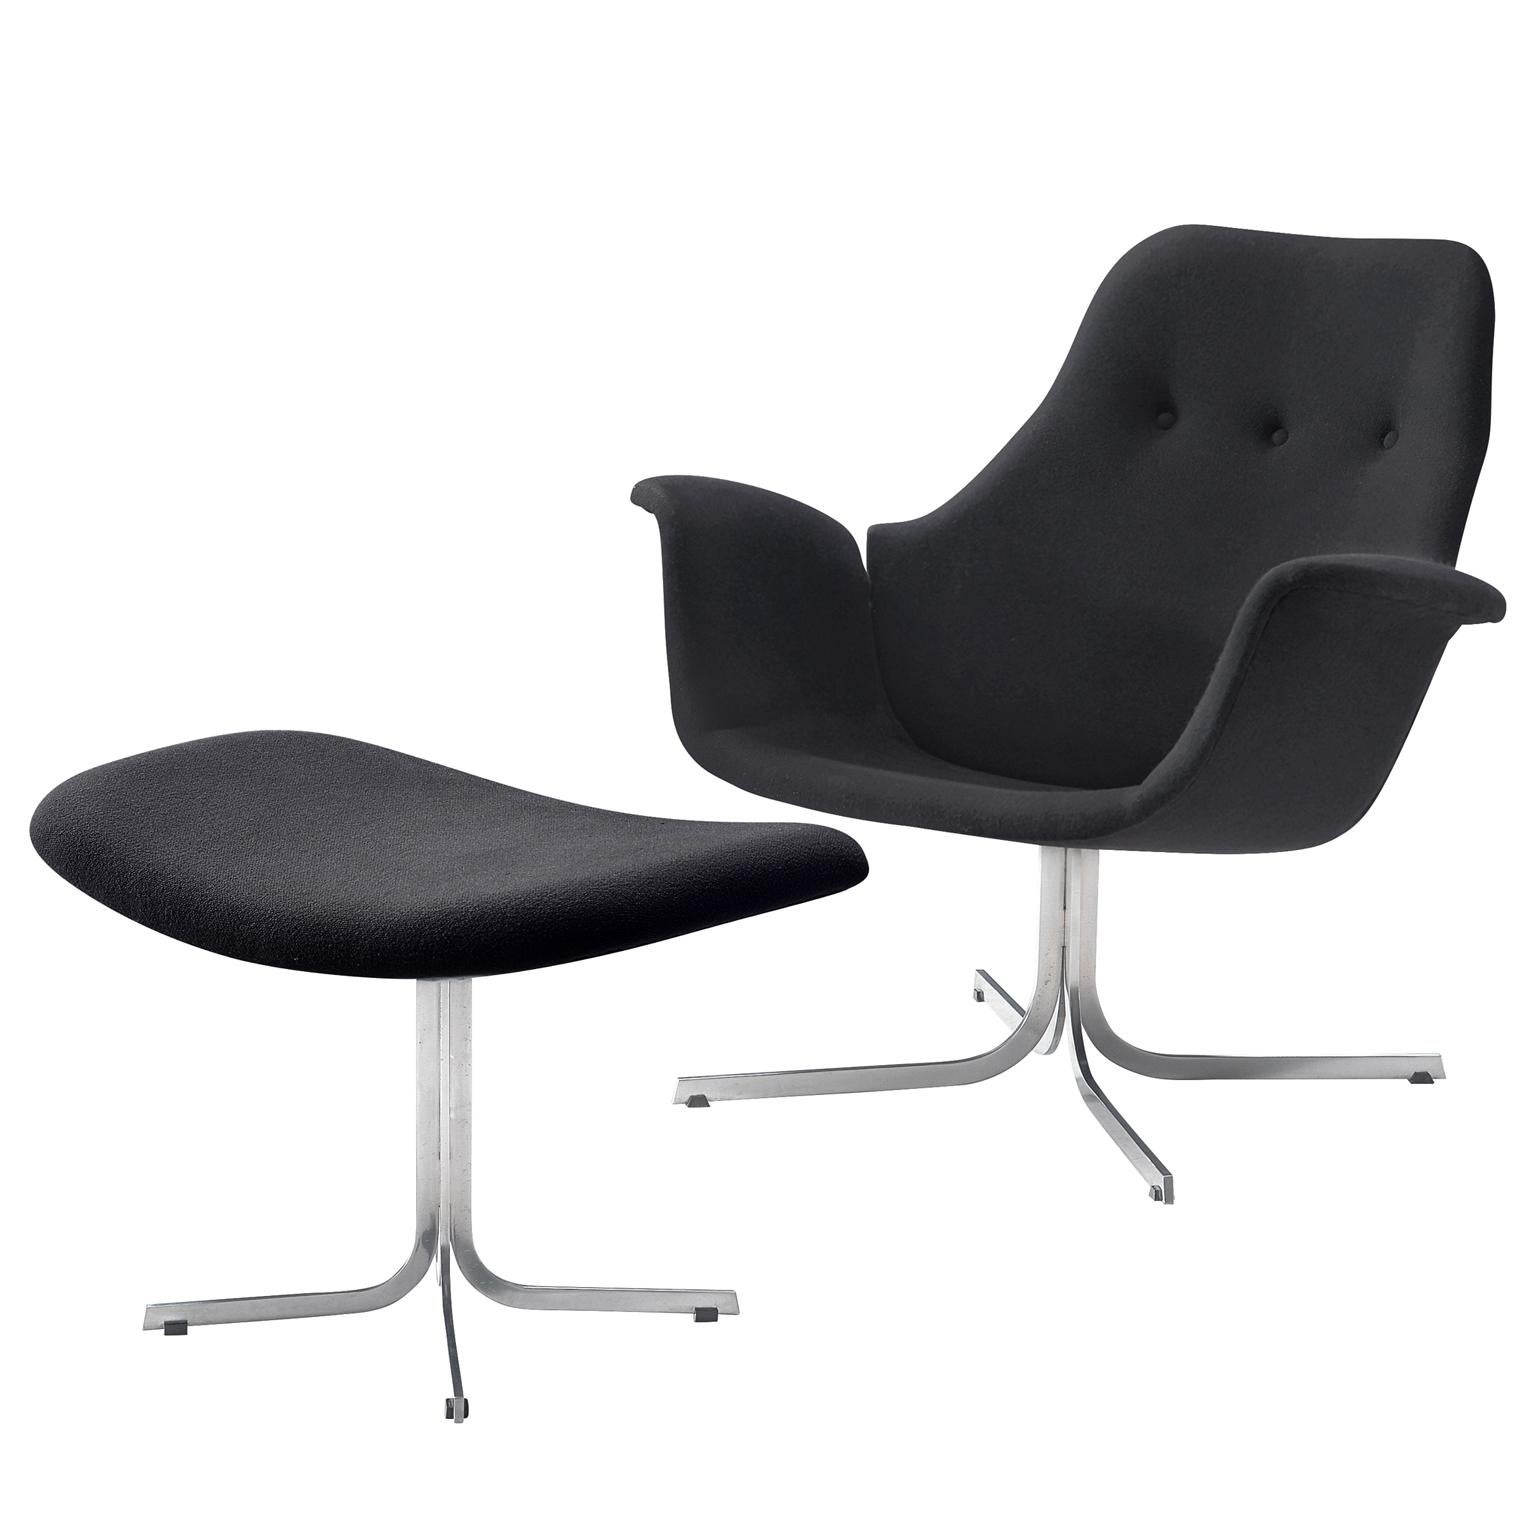 Pierre Paulin for Artifort 'Tulip' Chair with Ottoman